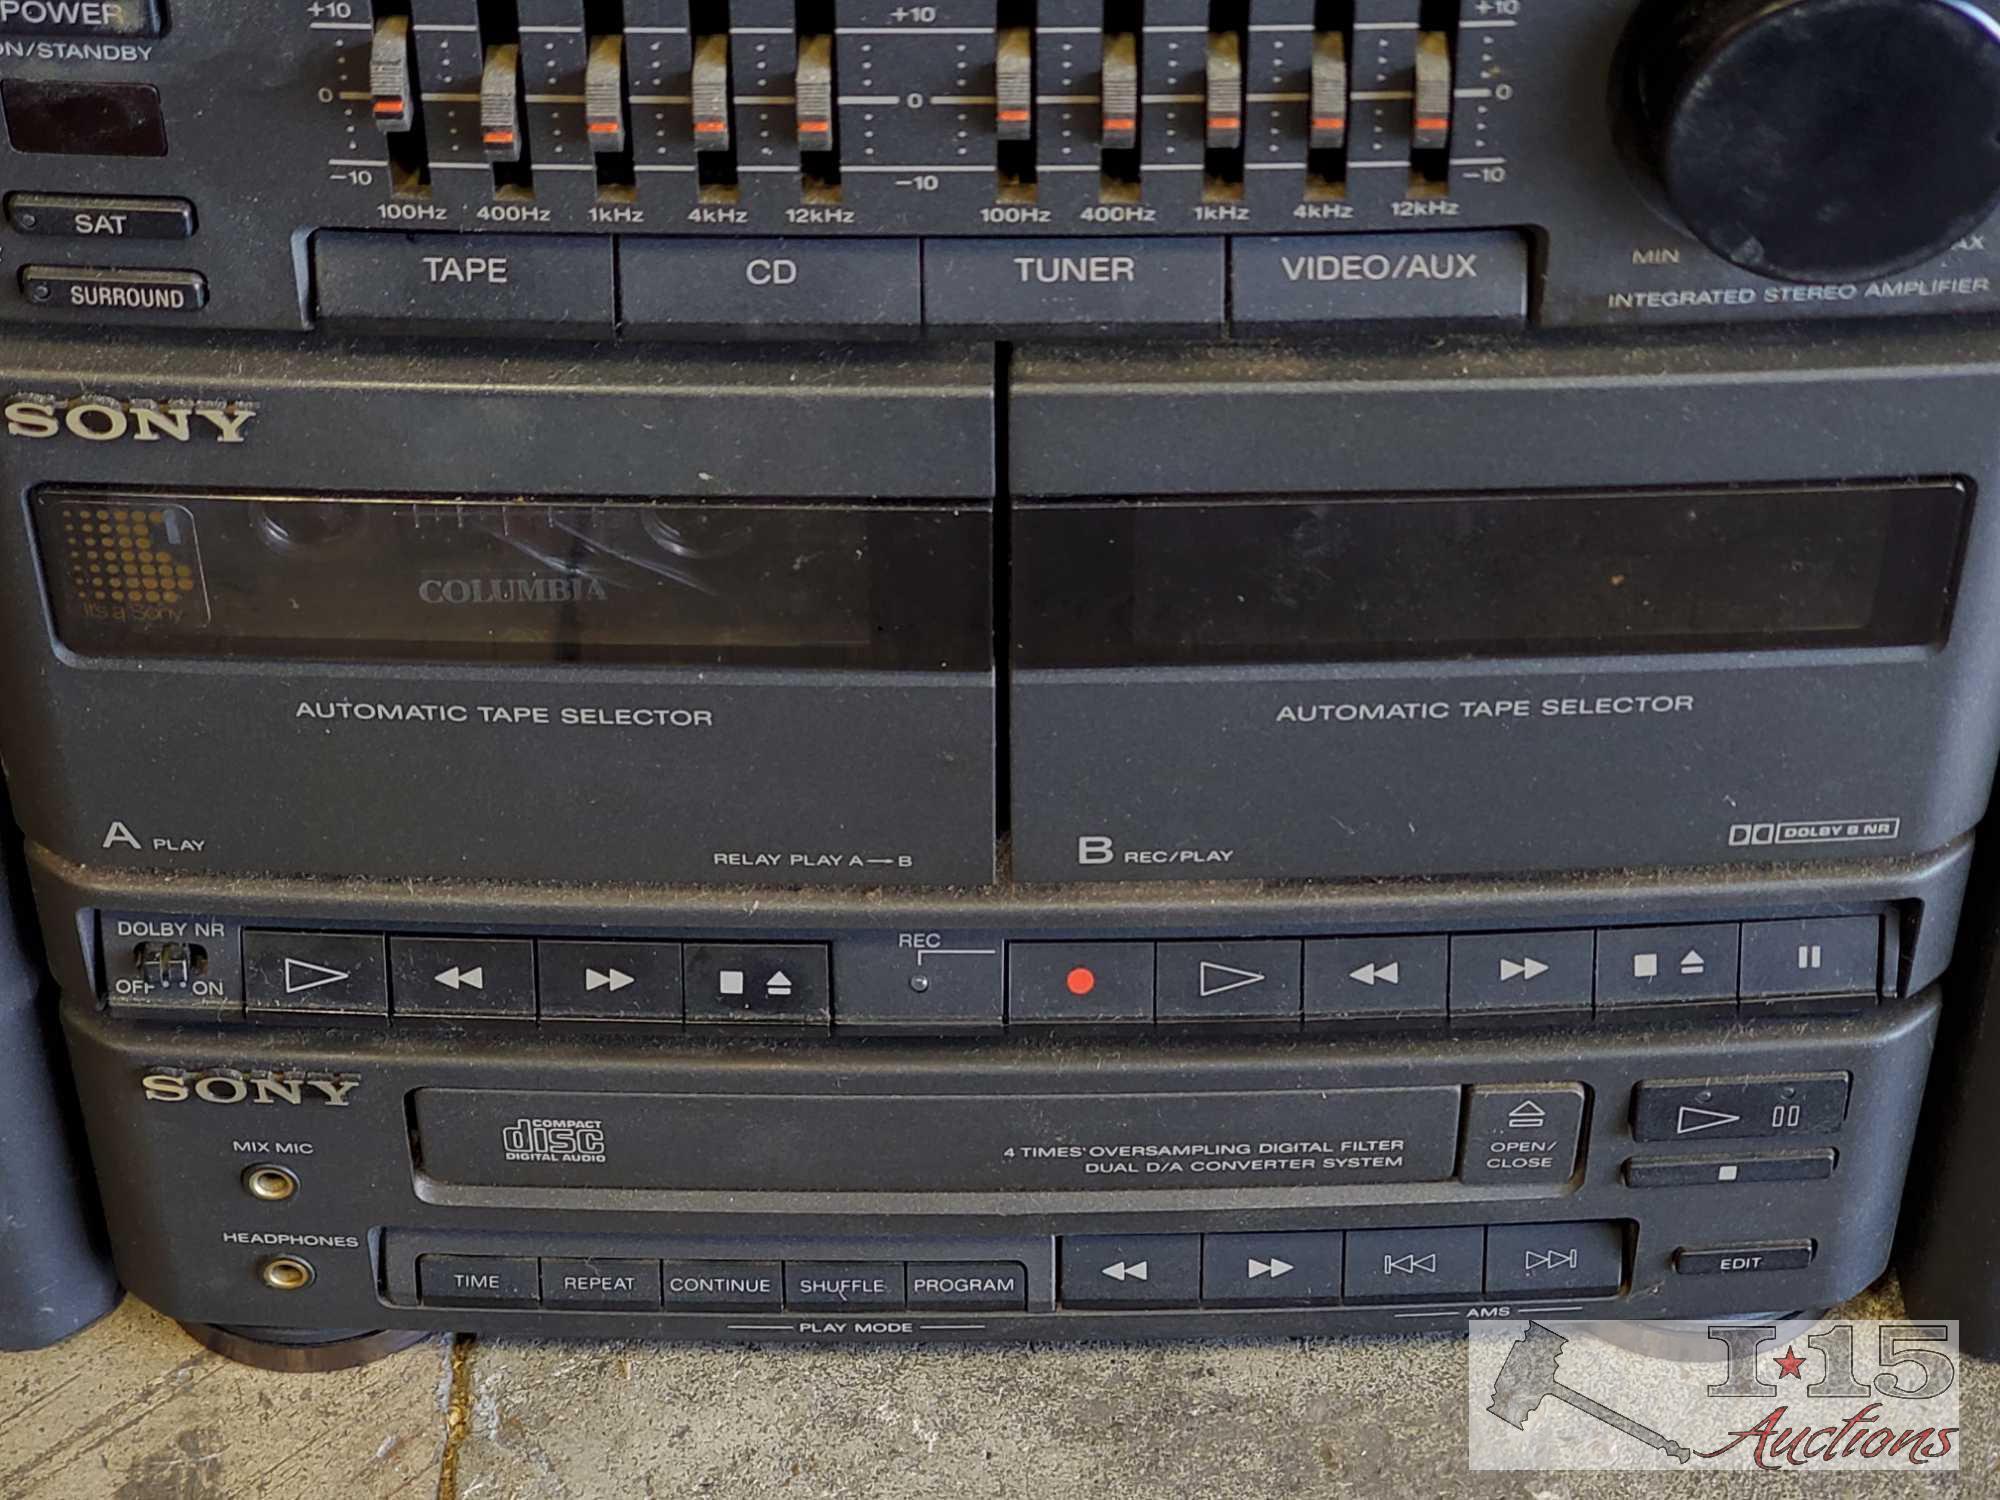 Sony Component System, Insignia Radio and Cassette-Corder